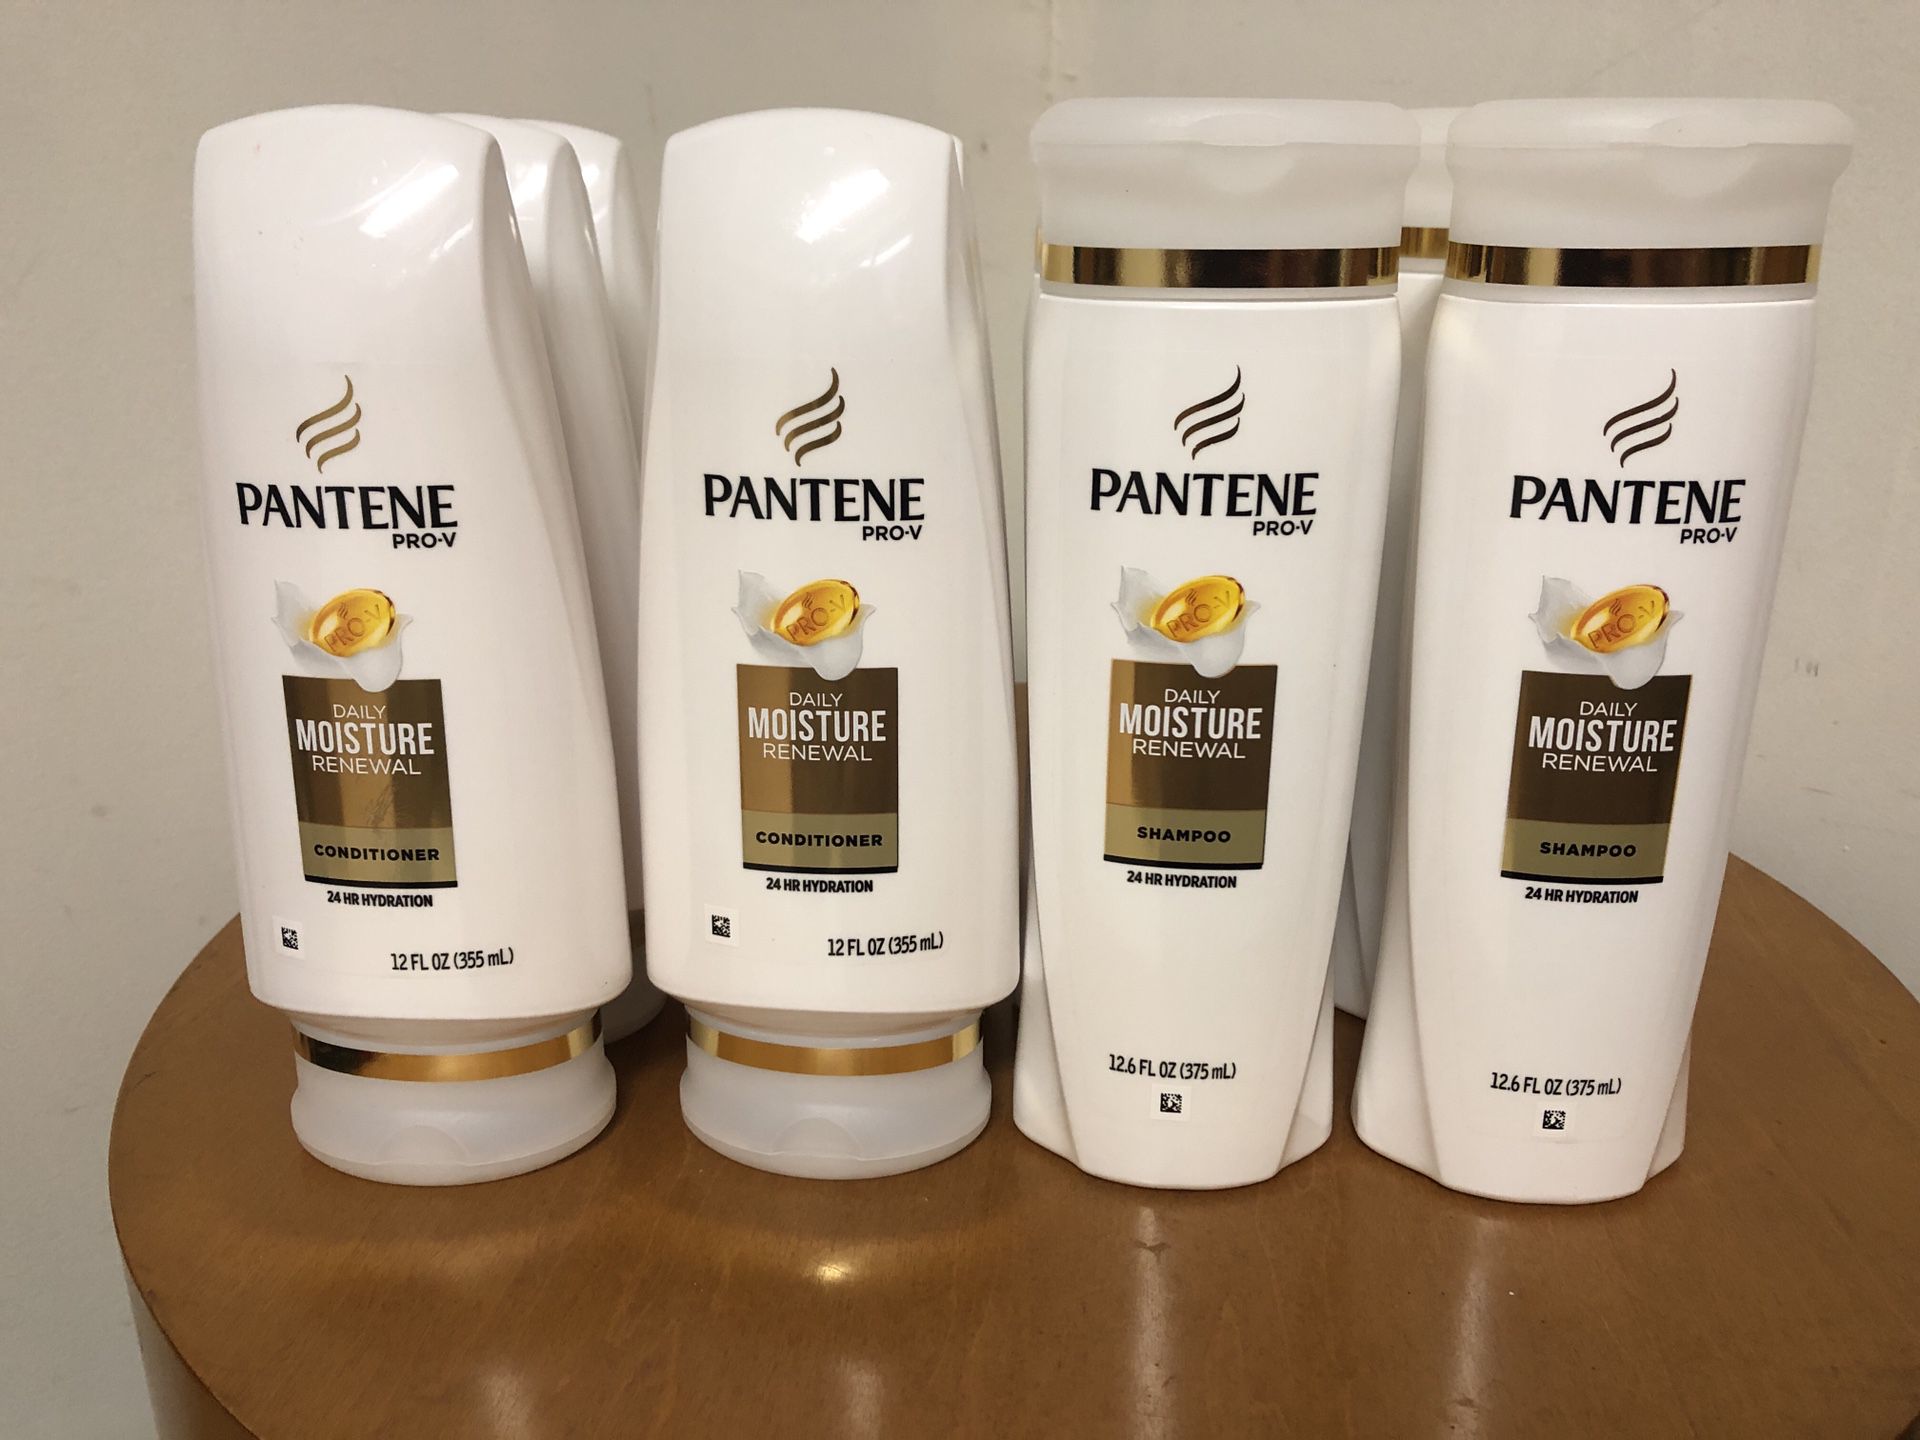 Pantene shampoo/conditioner (2 for $5 only)